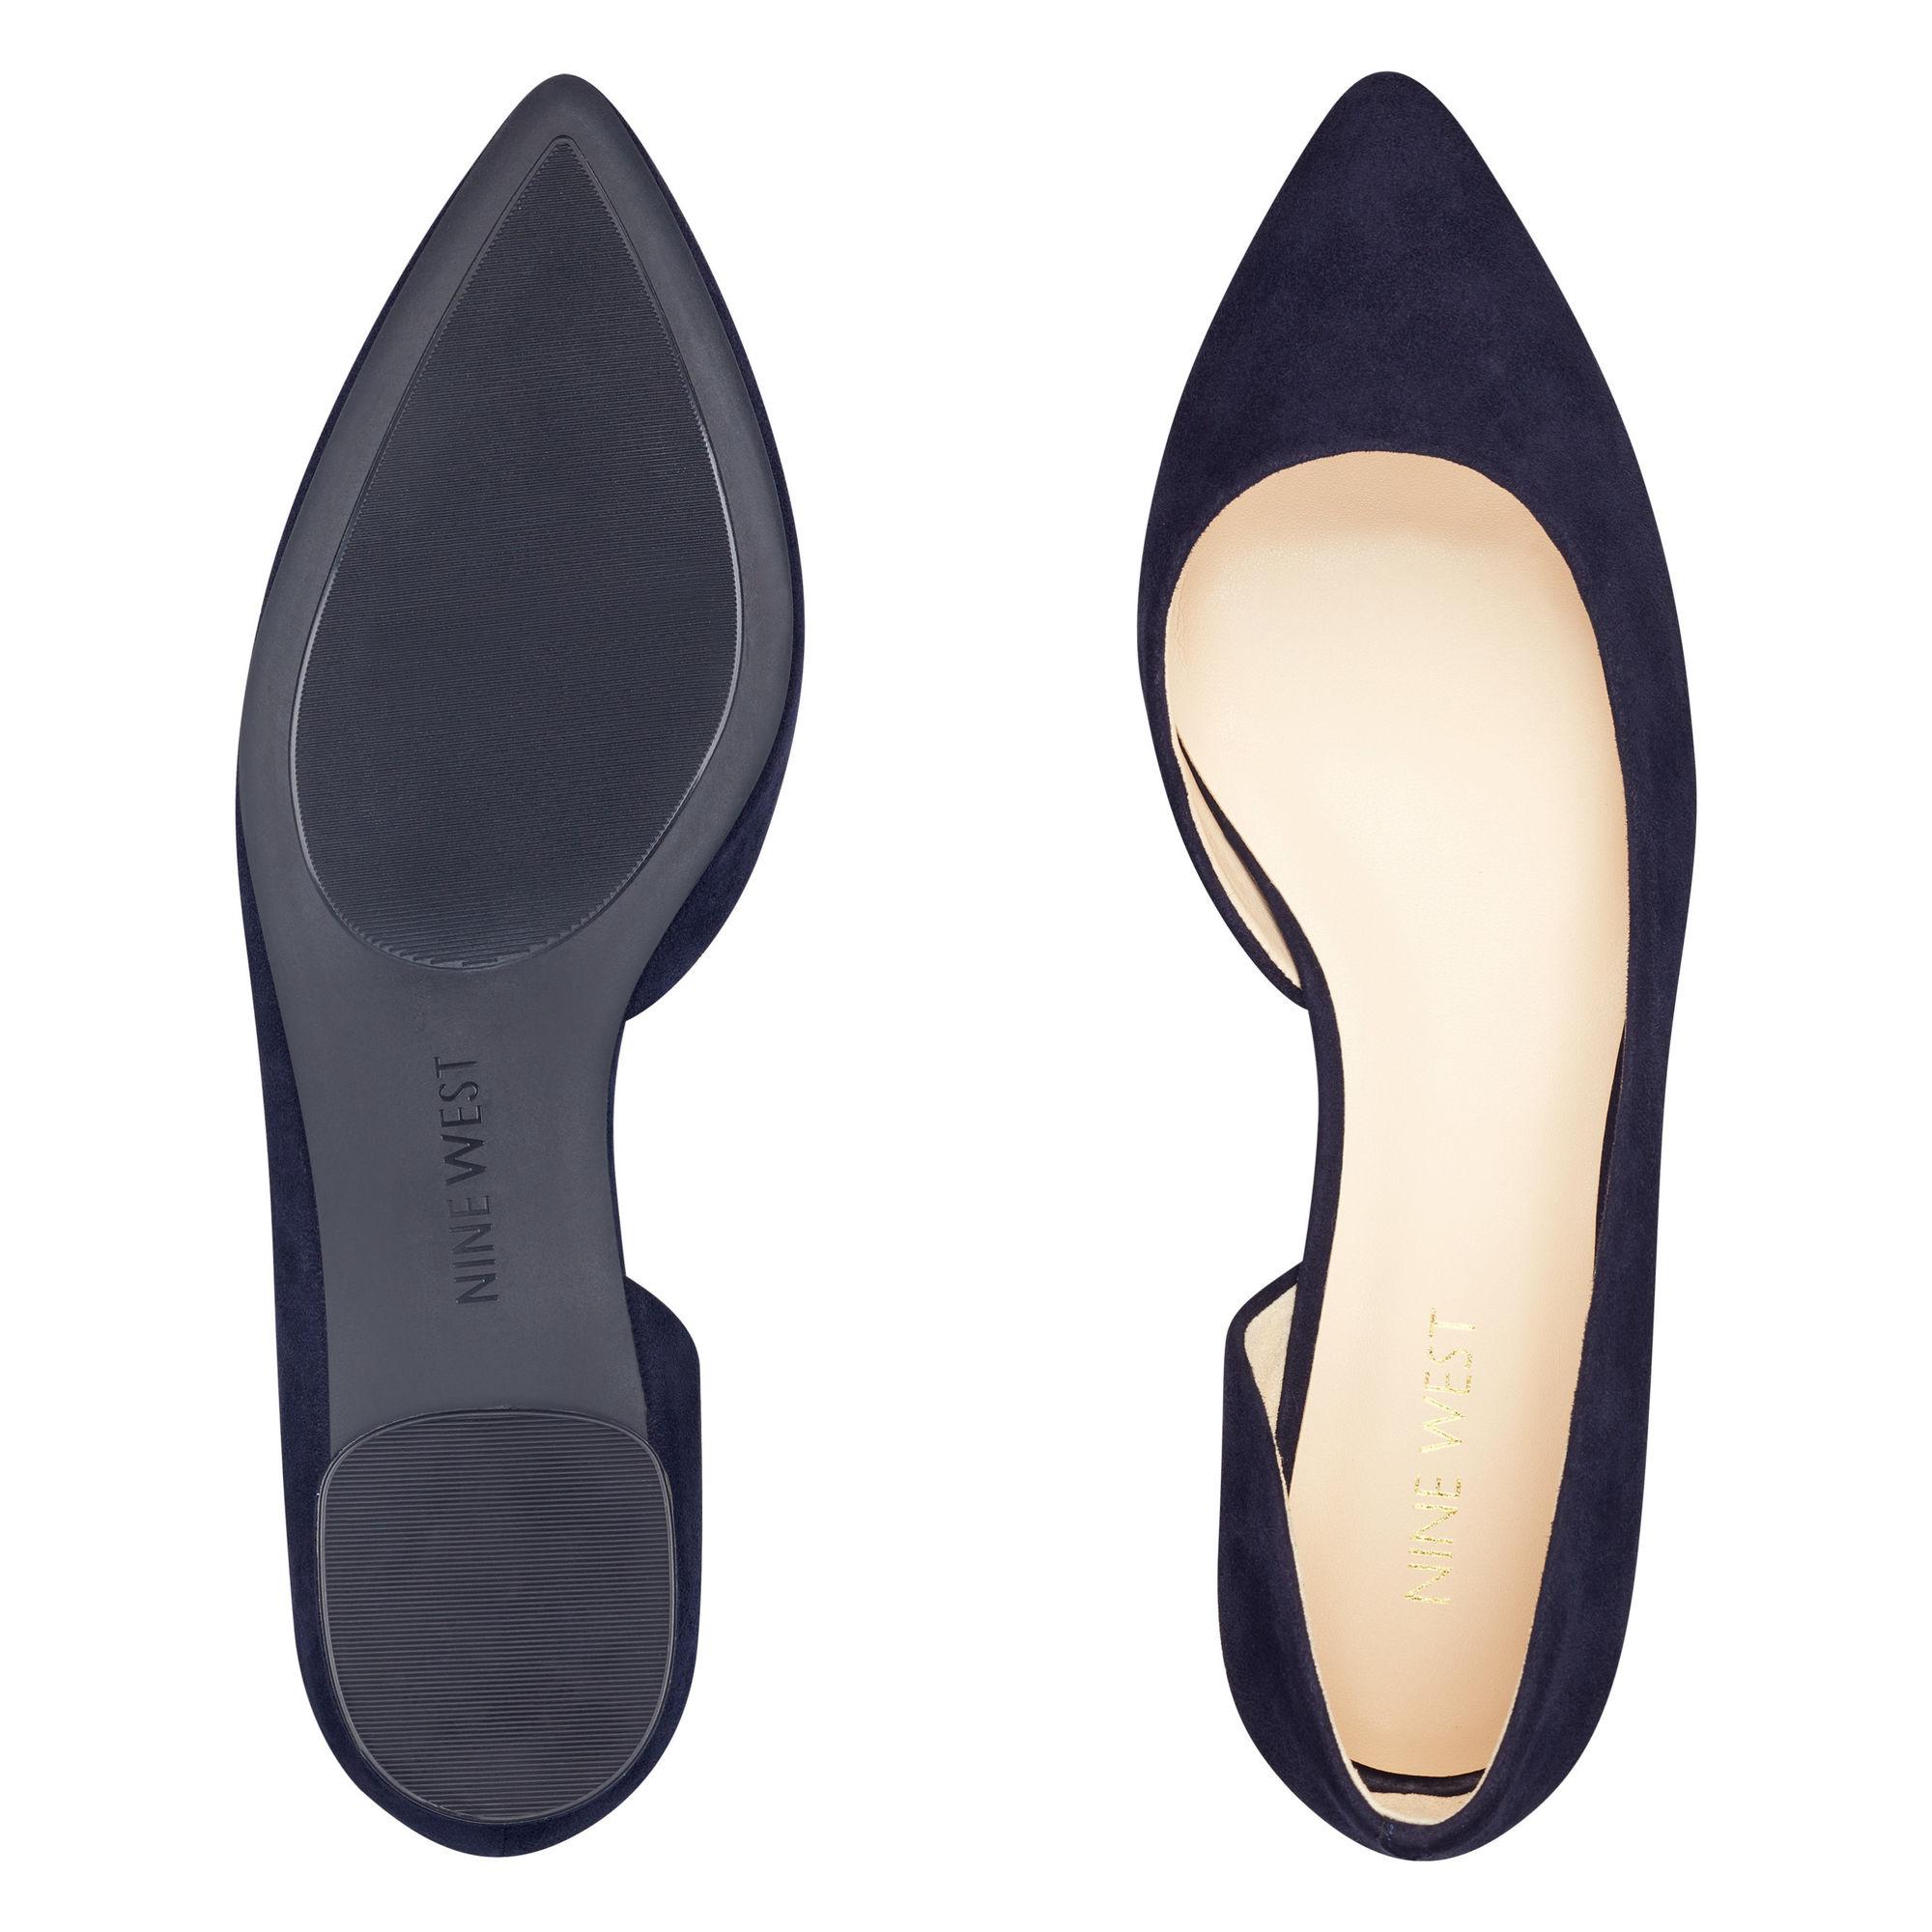 Nine West Leather Observe Half D'orsay Flats in Navy Suede (Blue) - Lyst